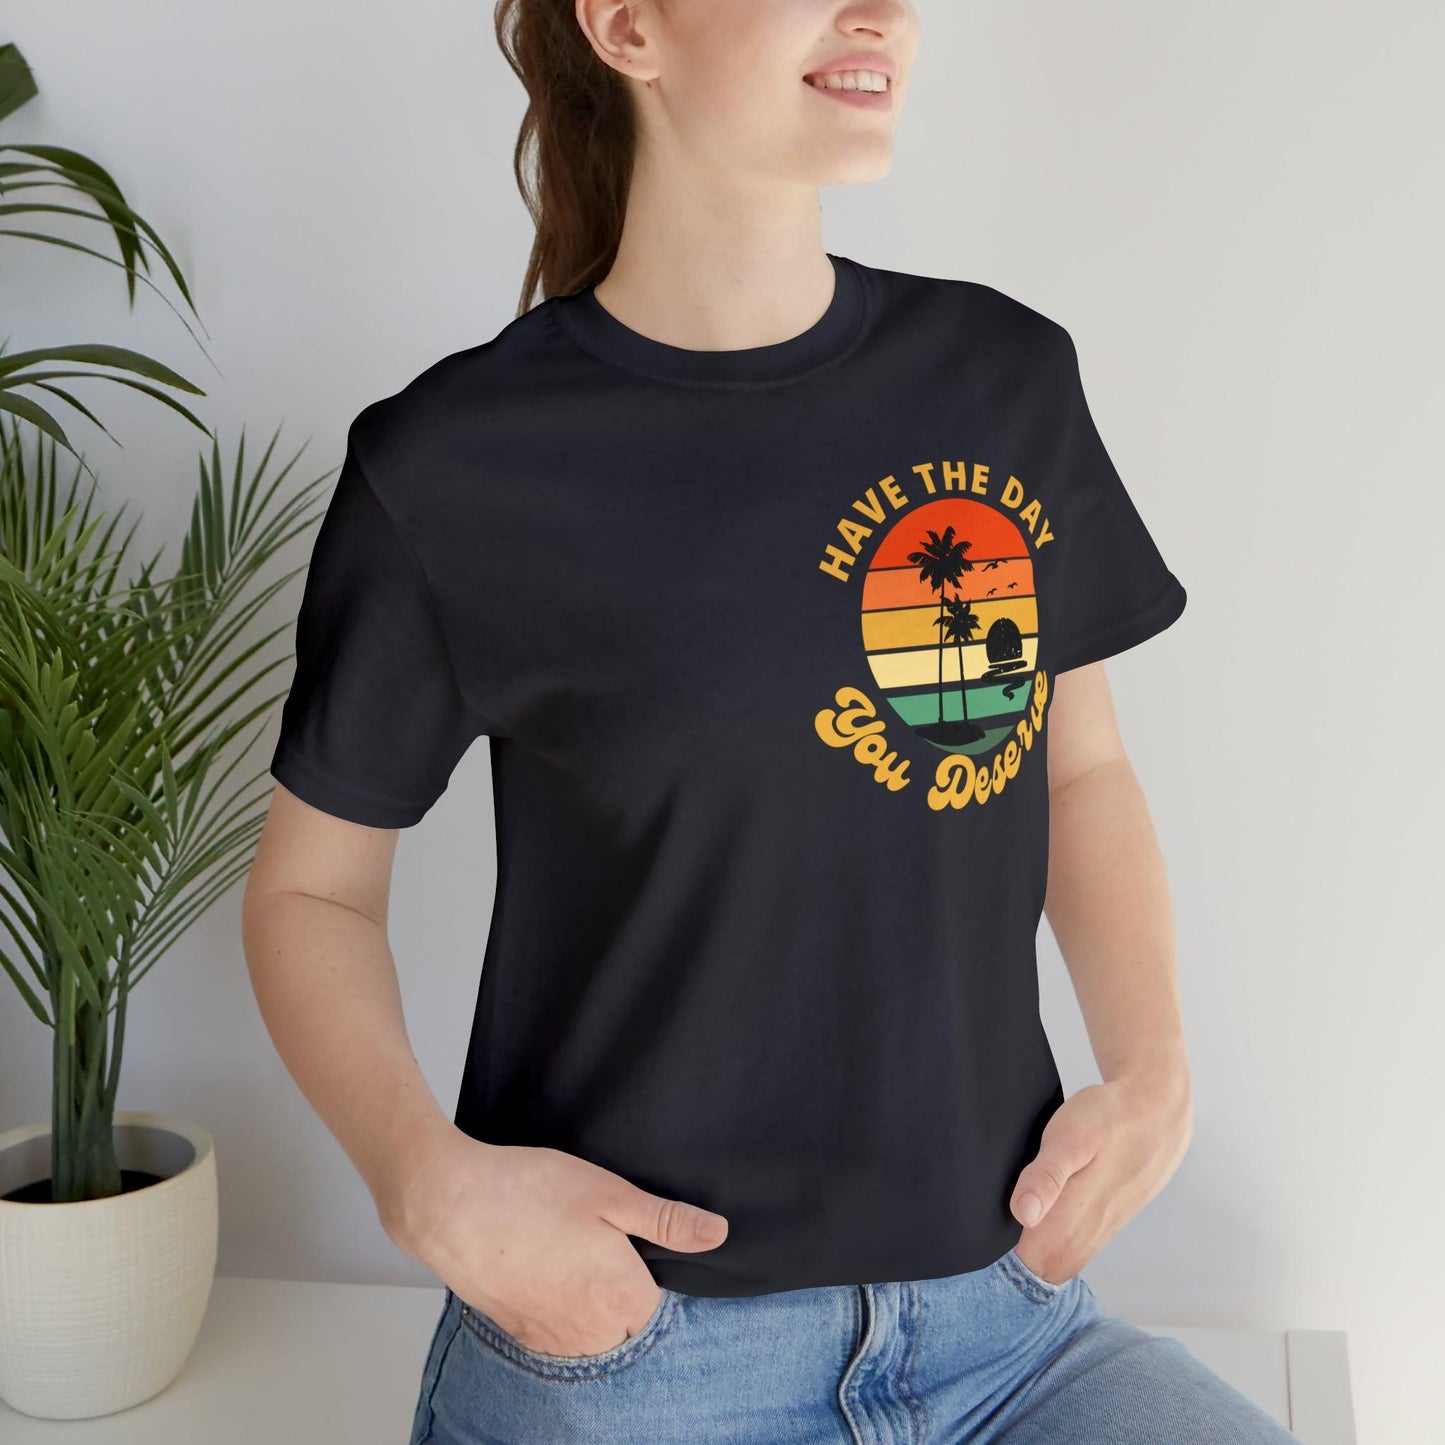 Have the Day You Deserve Shirt, Inspirational Graphic Tee, Motivational Tee, Positive Vibes Shirt, Trendy shirt and Vintage shirt - Giftsmojo